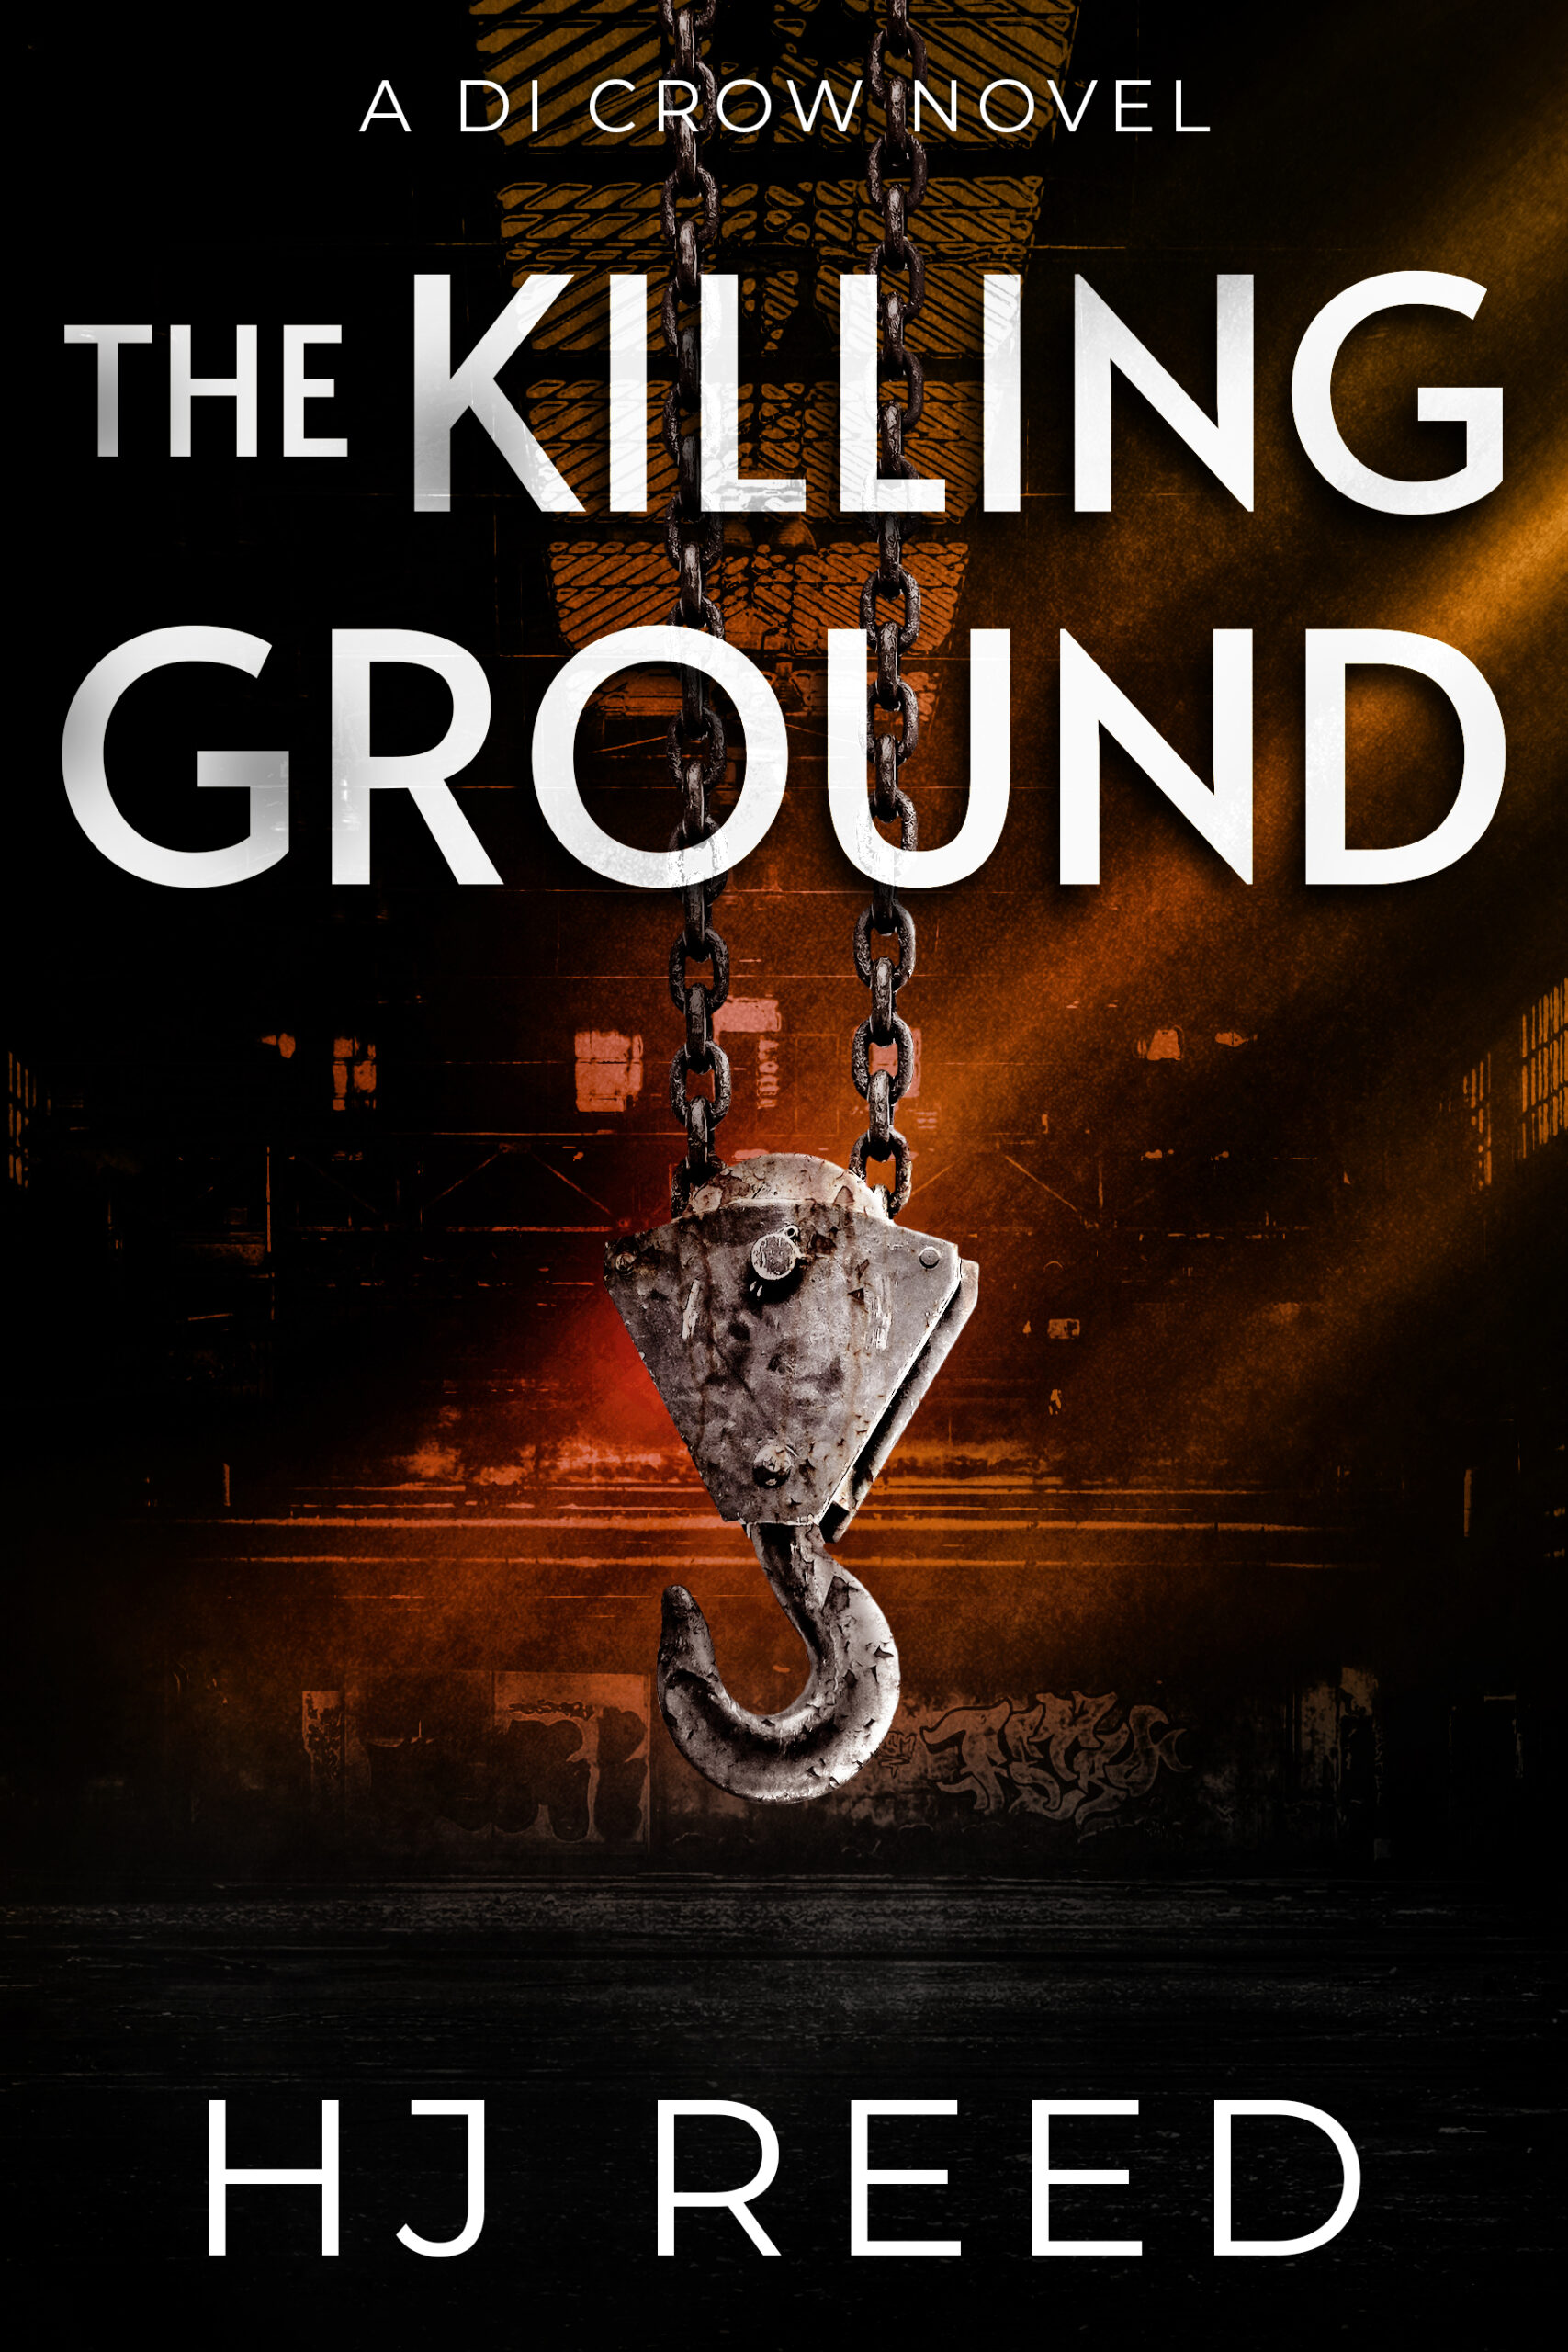 HJ REED NEW RELEASE – THE KILLING GROUND